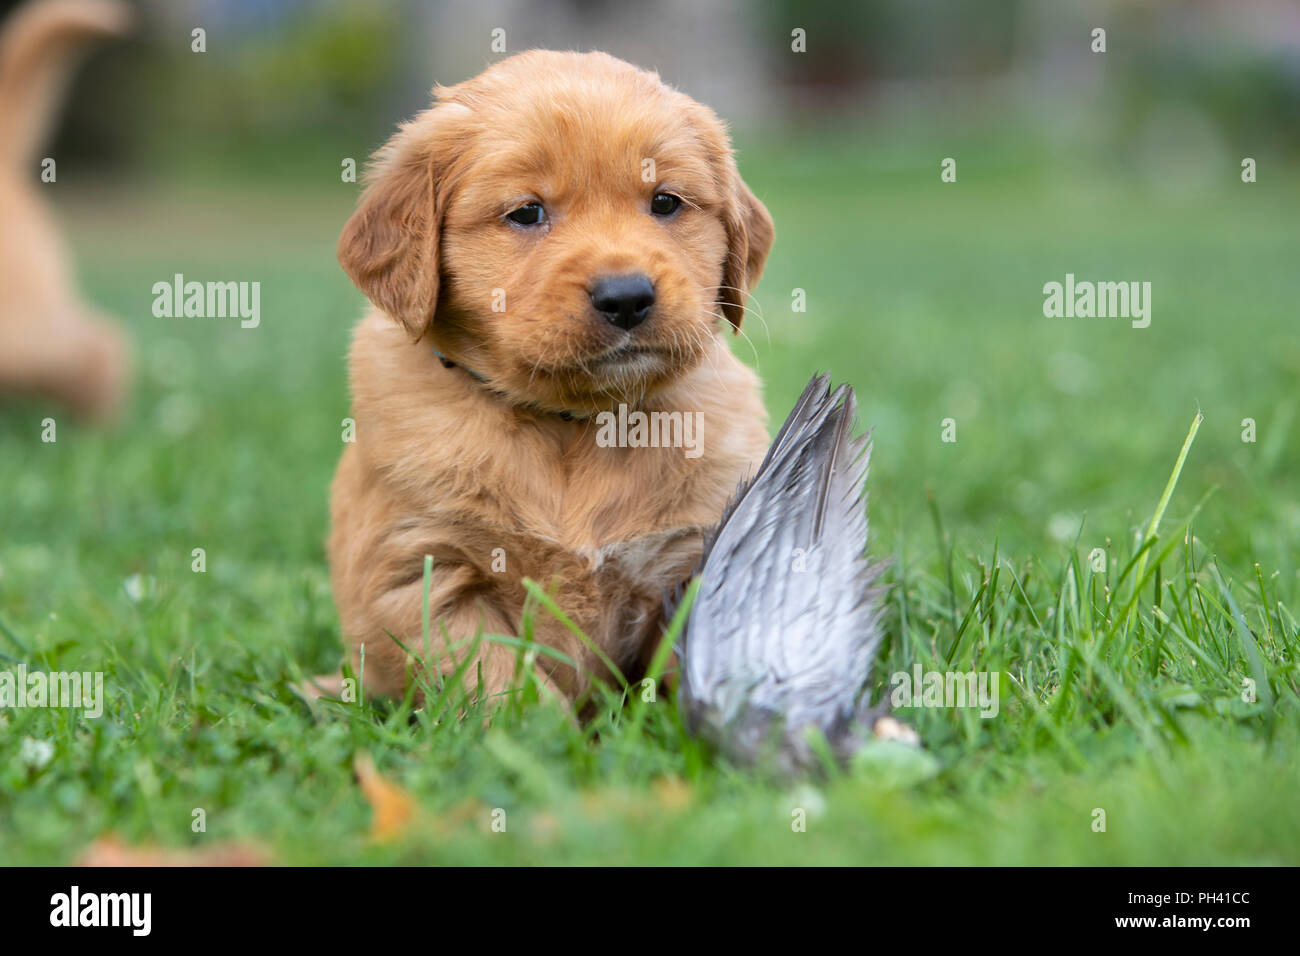 A Golden Retriever Puppy Laying In The Grass With A Feather Stock Photo Alamy